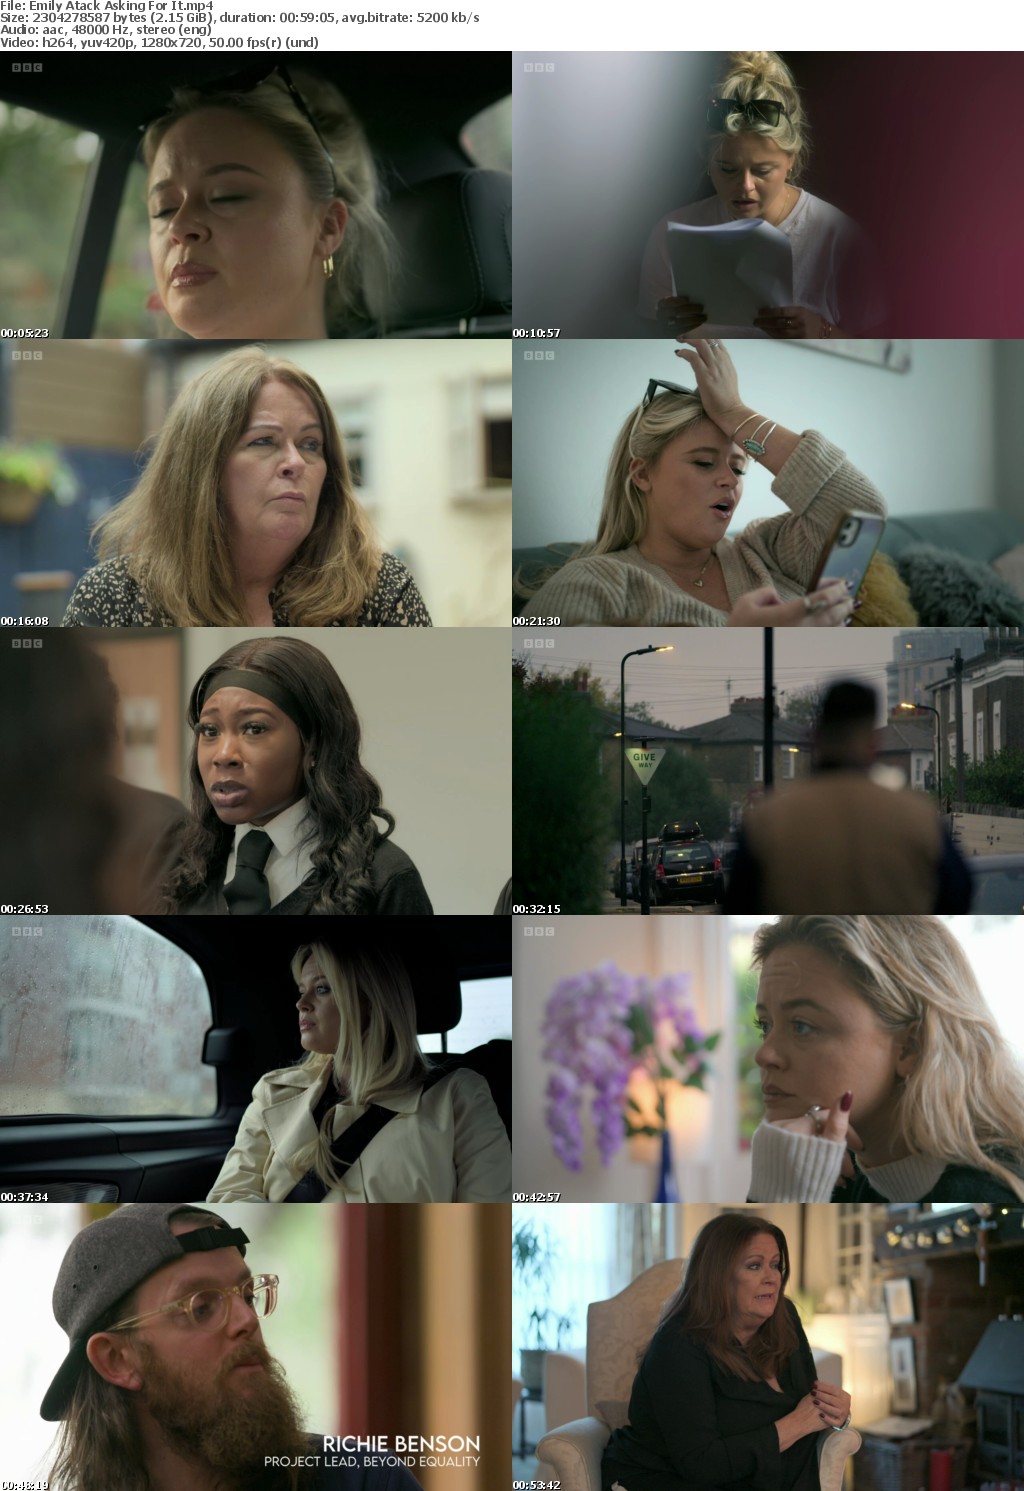 Emily Atack - Asking For It (1280x720p HD, 50fps, soft Eng subs)